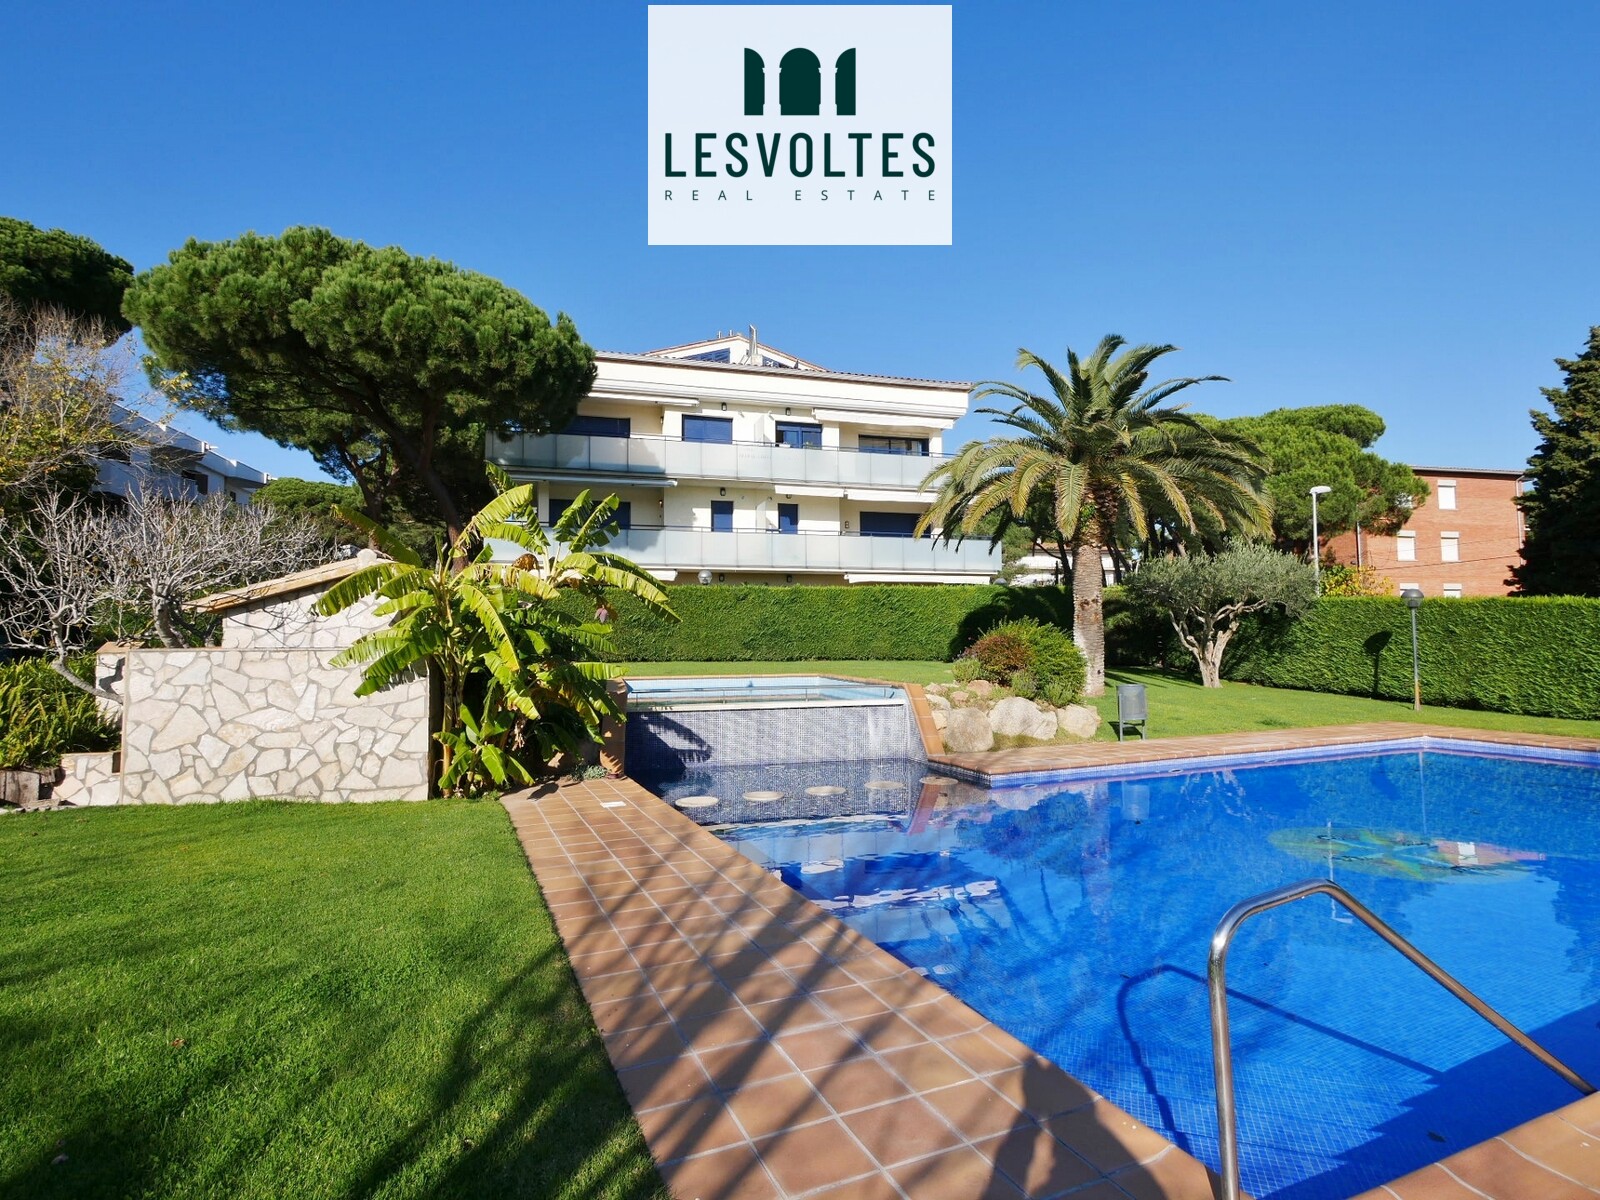 MAGNIFICENT GROUND FLOOR WITH PRIVATE GARDEN, COMMUNITY AREA WITH POOL AND PARKING IN CALELLA DE PALAFRUGELL